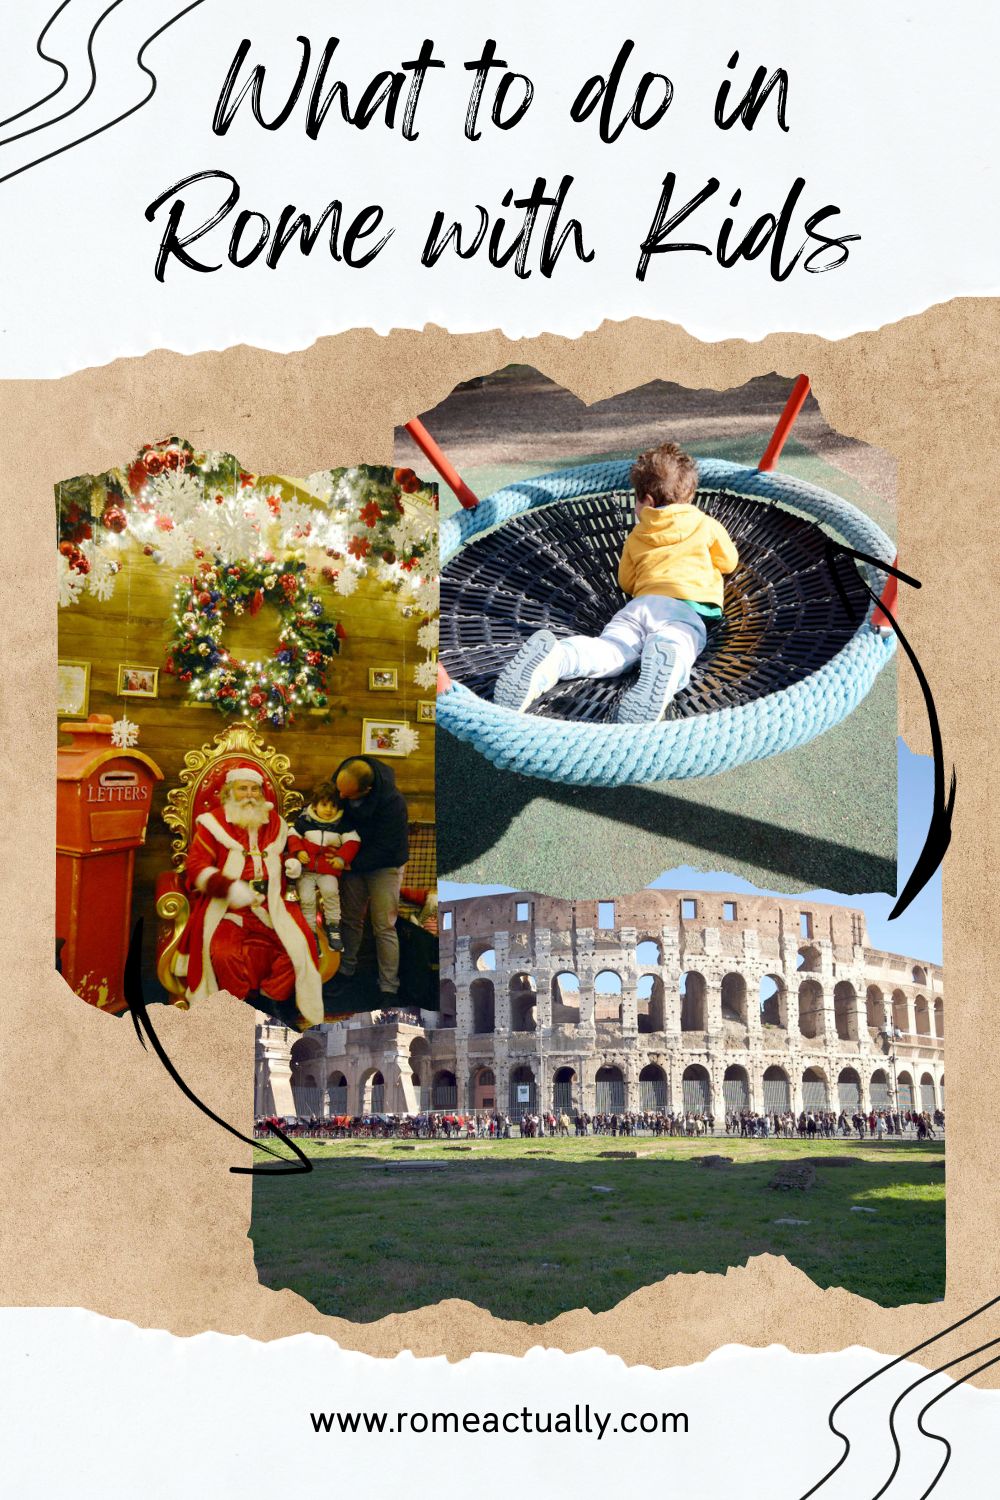 Pinterest image: Three photos of Rome with caption "What to do in Rome with kids".